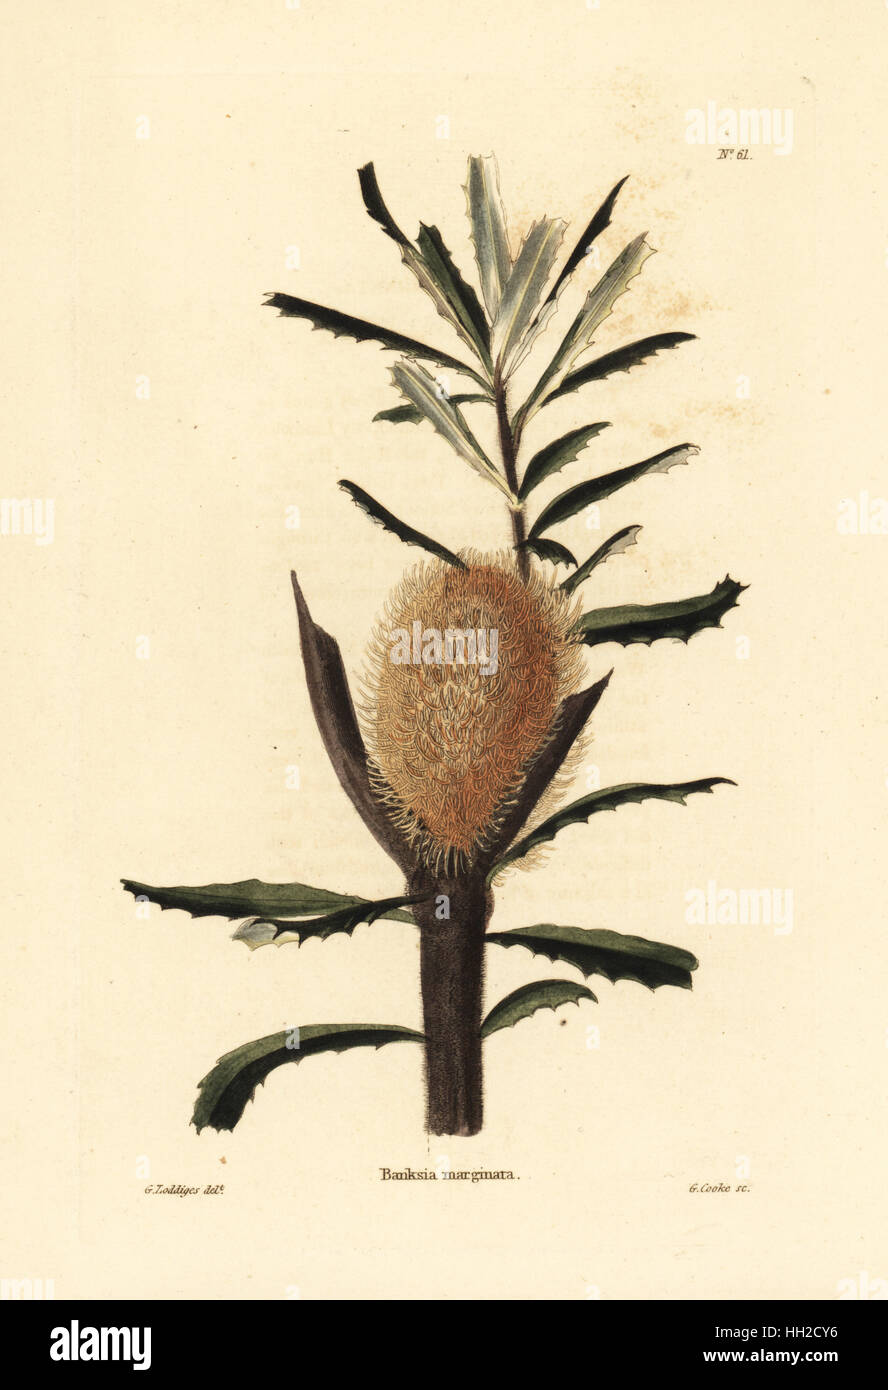 Silver banksia, Banksia marginata. Australia. Handcoloured copperplate engraving by George Cooke after George Loddiges from Conrad Loddiges' Botanical Cabinet, Hackney, 1817. Stock Photo